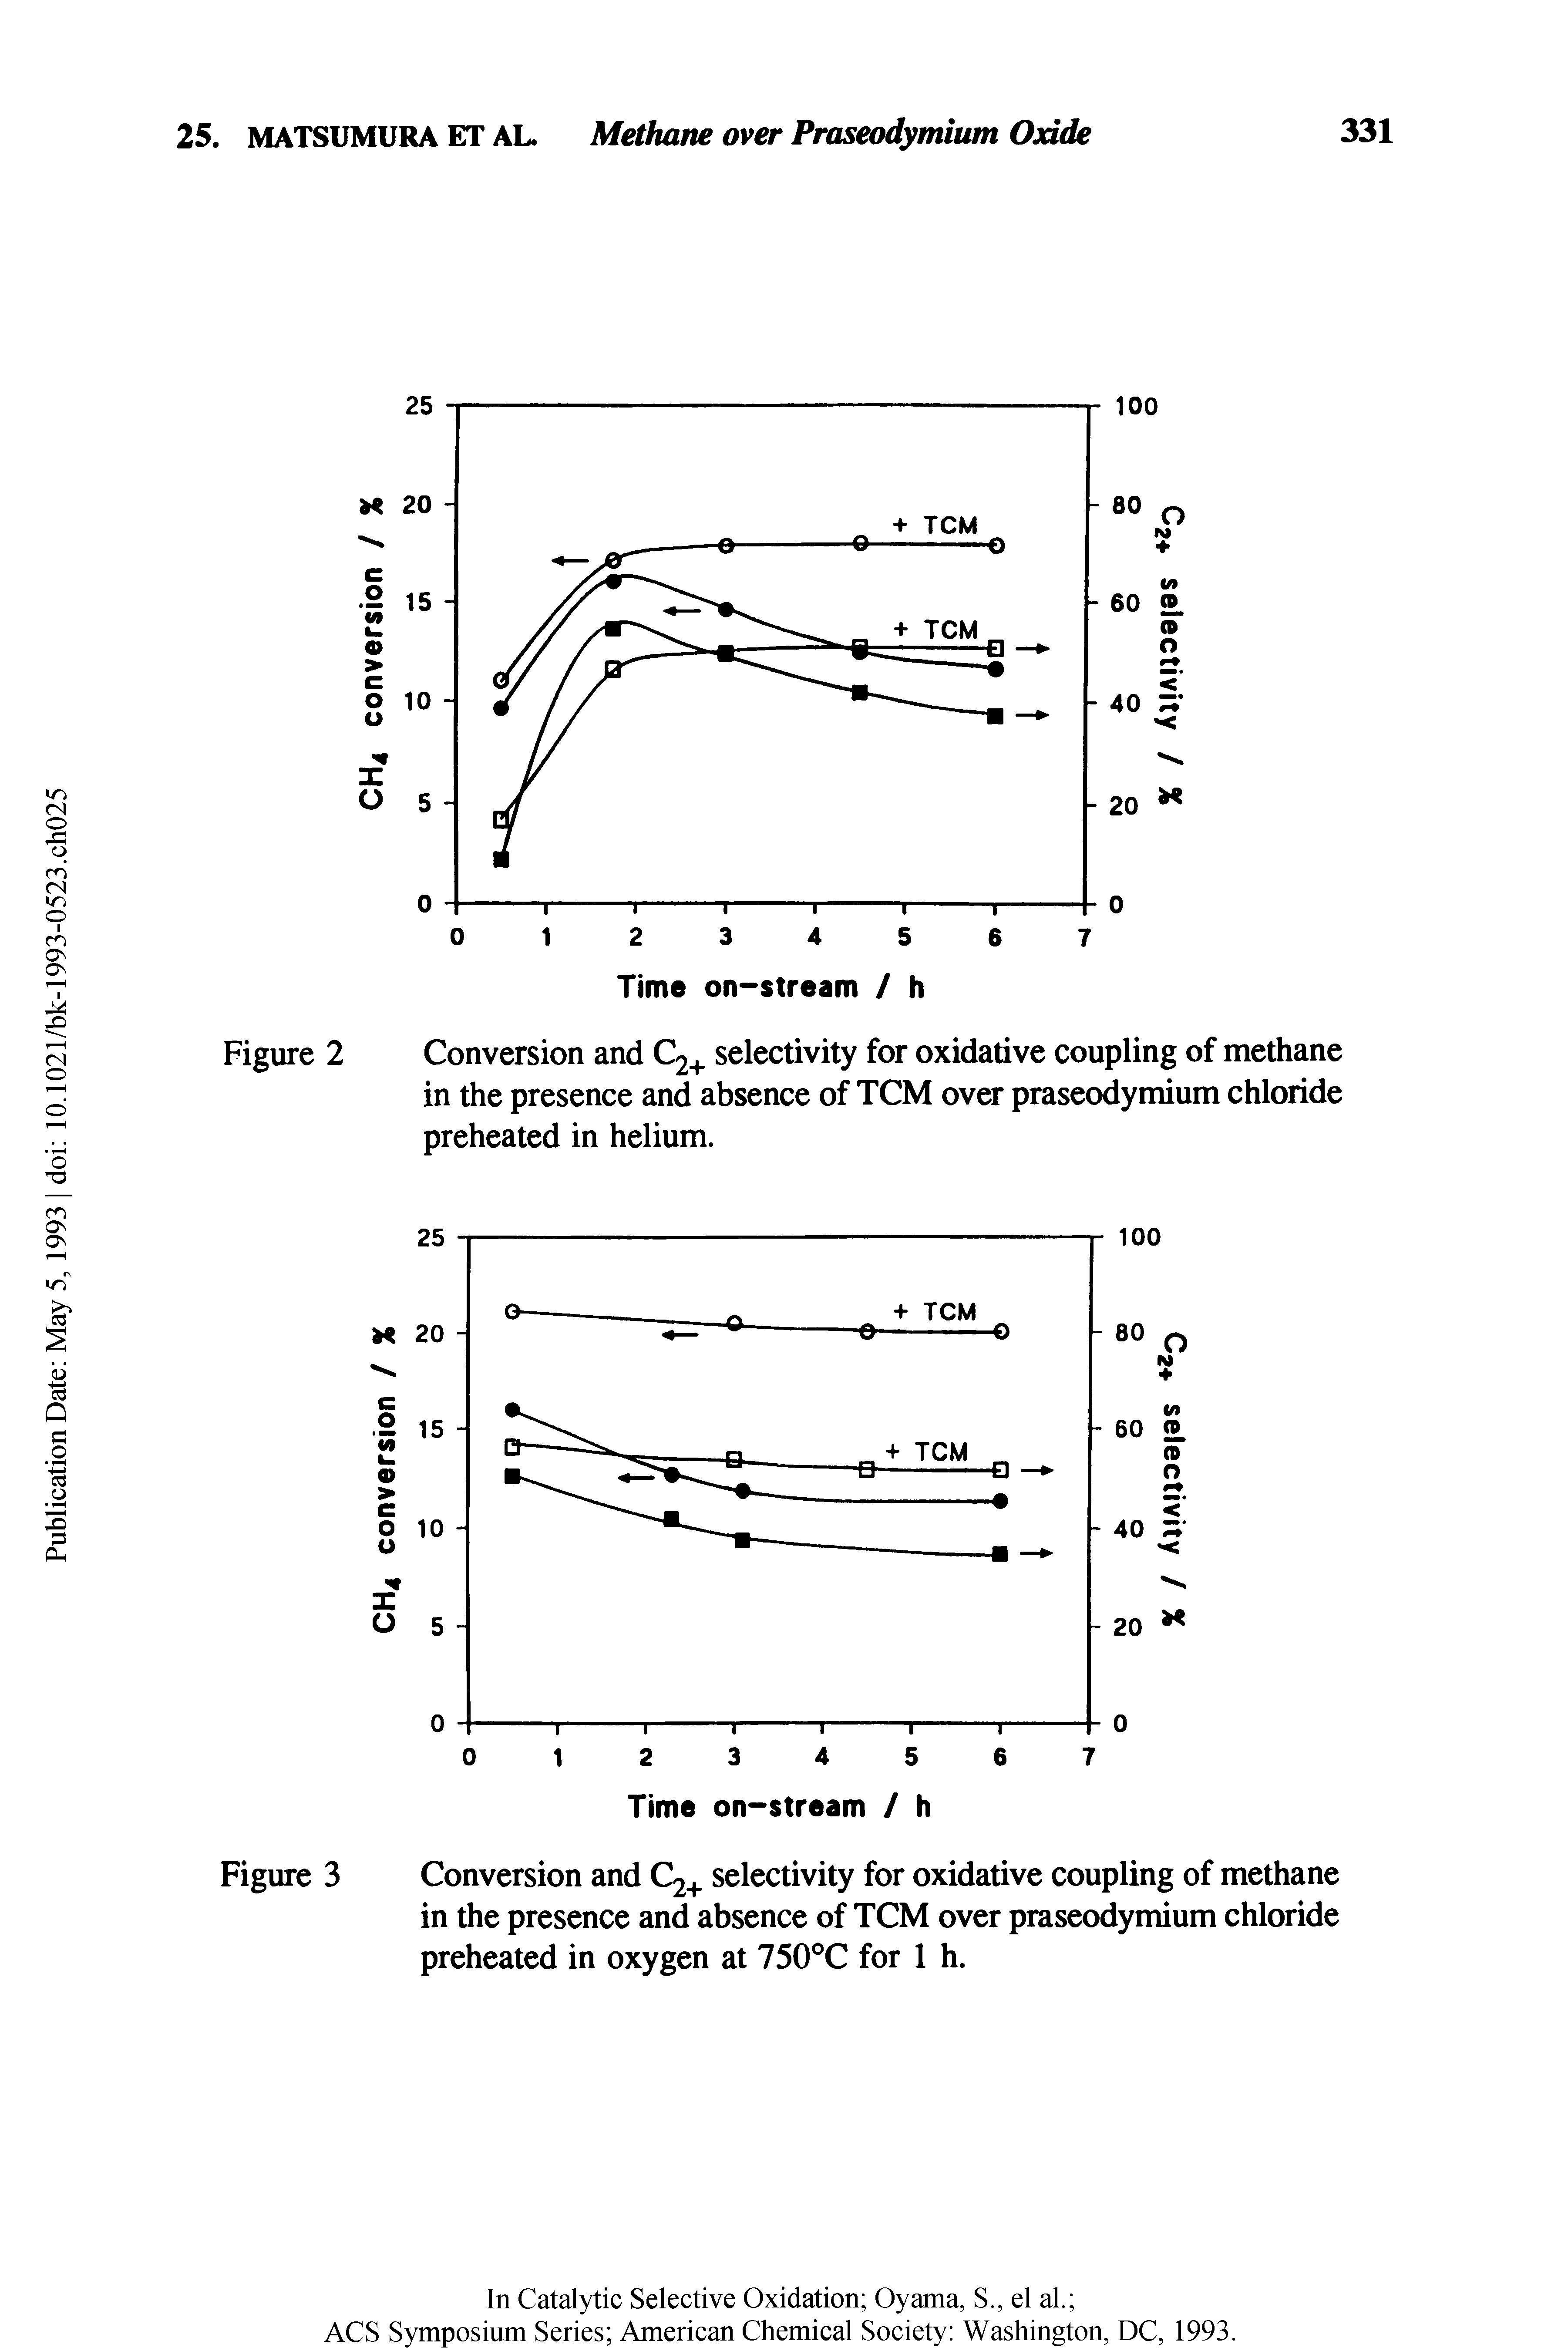 Figure 2 Conversion and C2+ selectivity for oxidative coupling of methane in the presence and absence of TCM over praseodymium chloride preheated in helium.